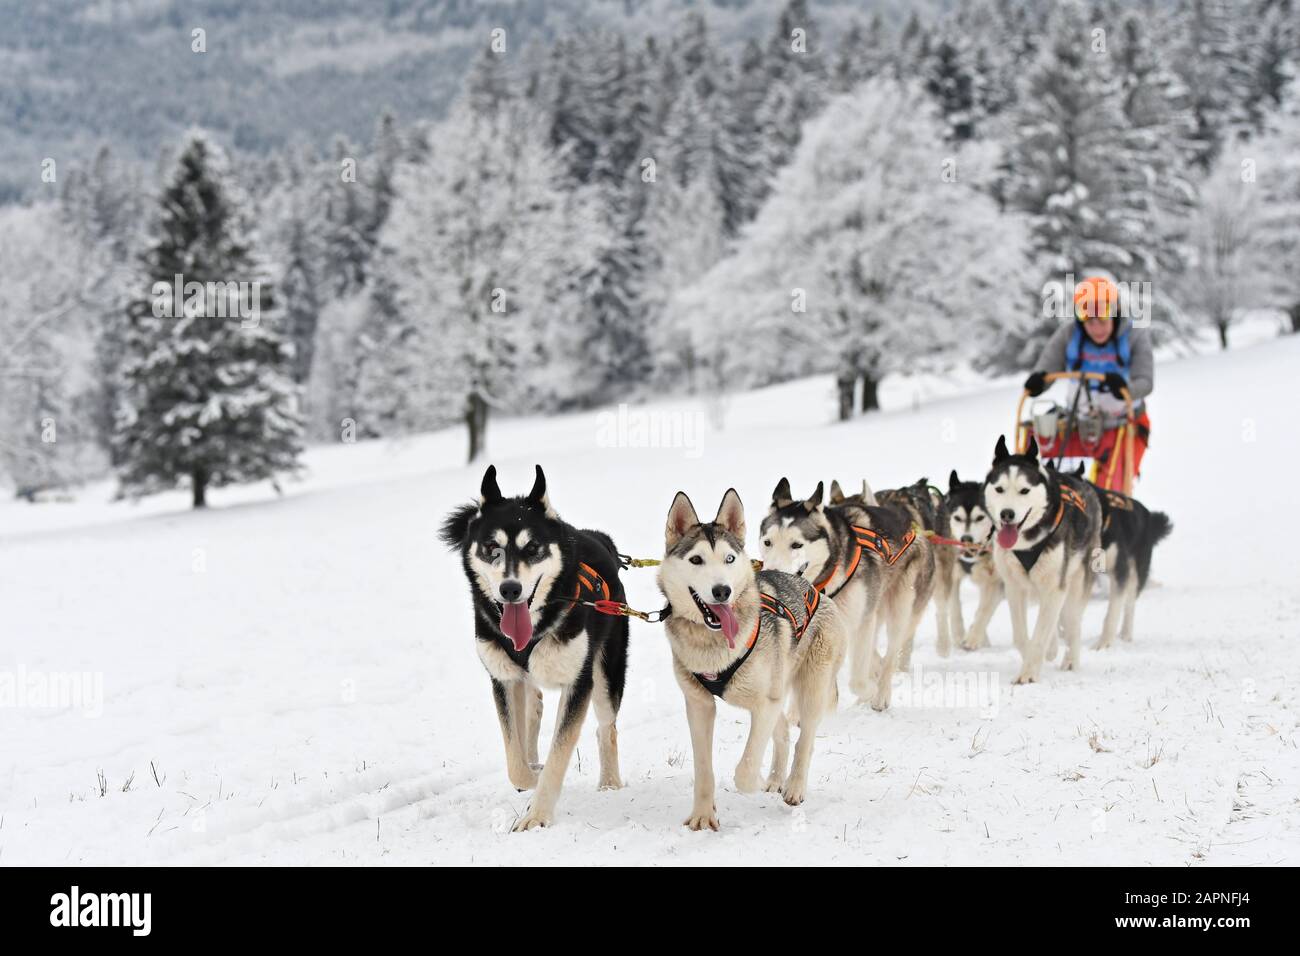 Mushers High Resolution Stock Photography and Images - Alamy